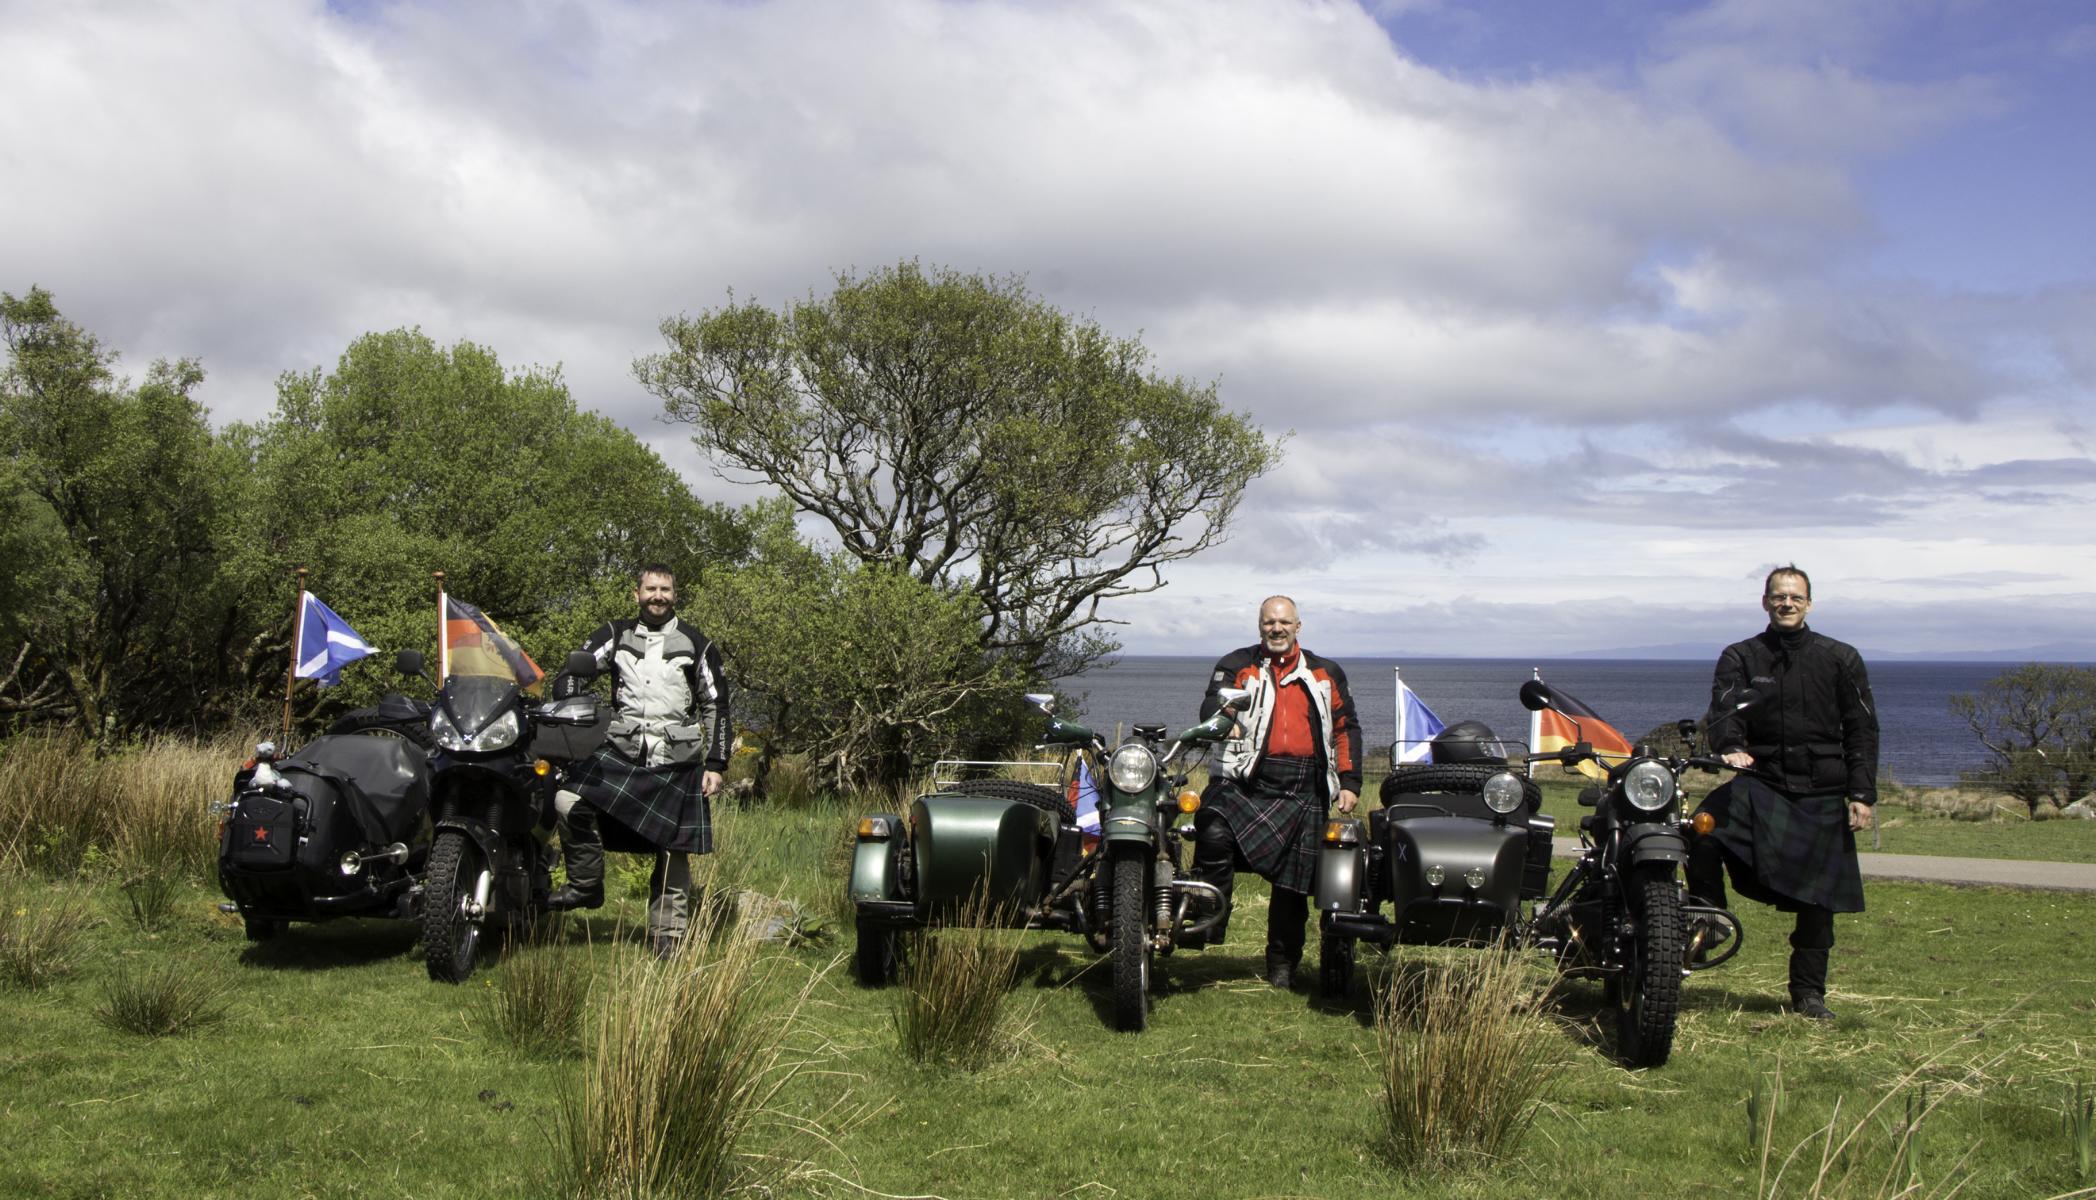 Scotland - motorcycles with sidecars - kilts. These truly belong together.